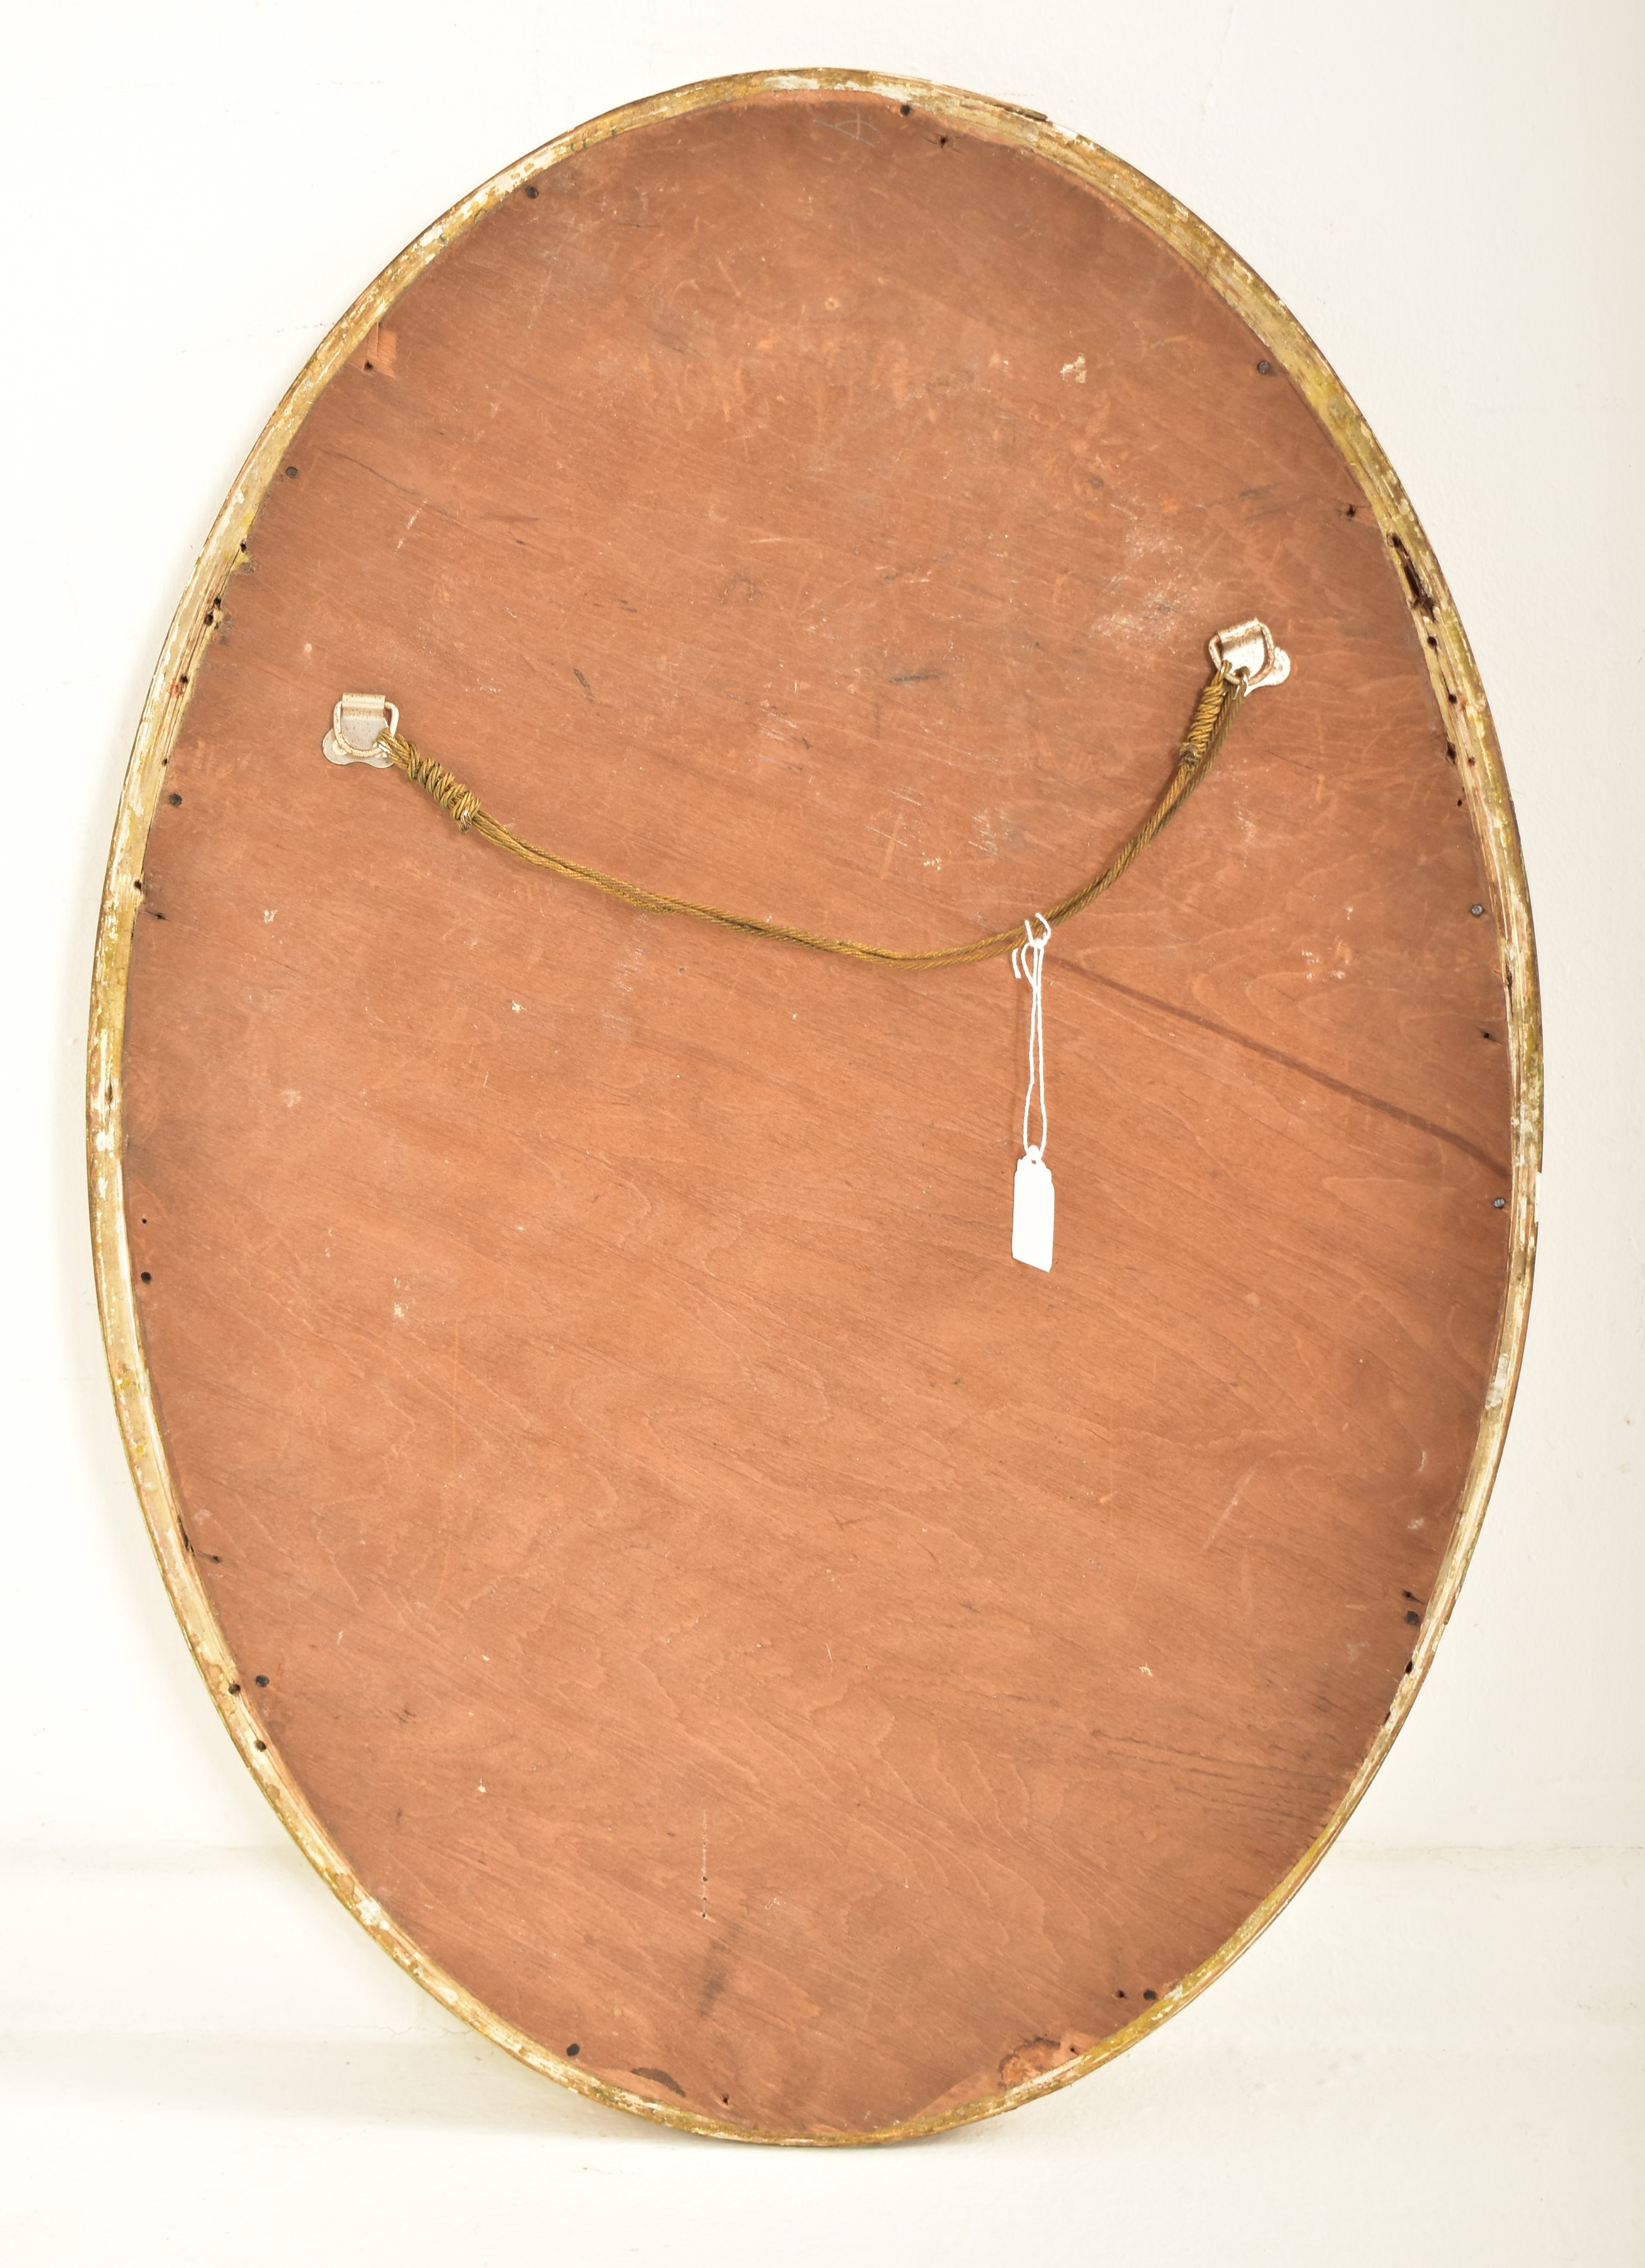 PAIR OF LATE VICTORIAN GILT GESSO & WOOD OVAL WALL MIRRORS - Image 5 of 5